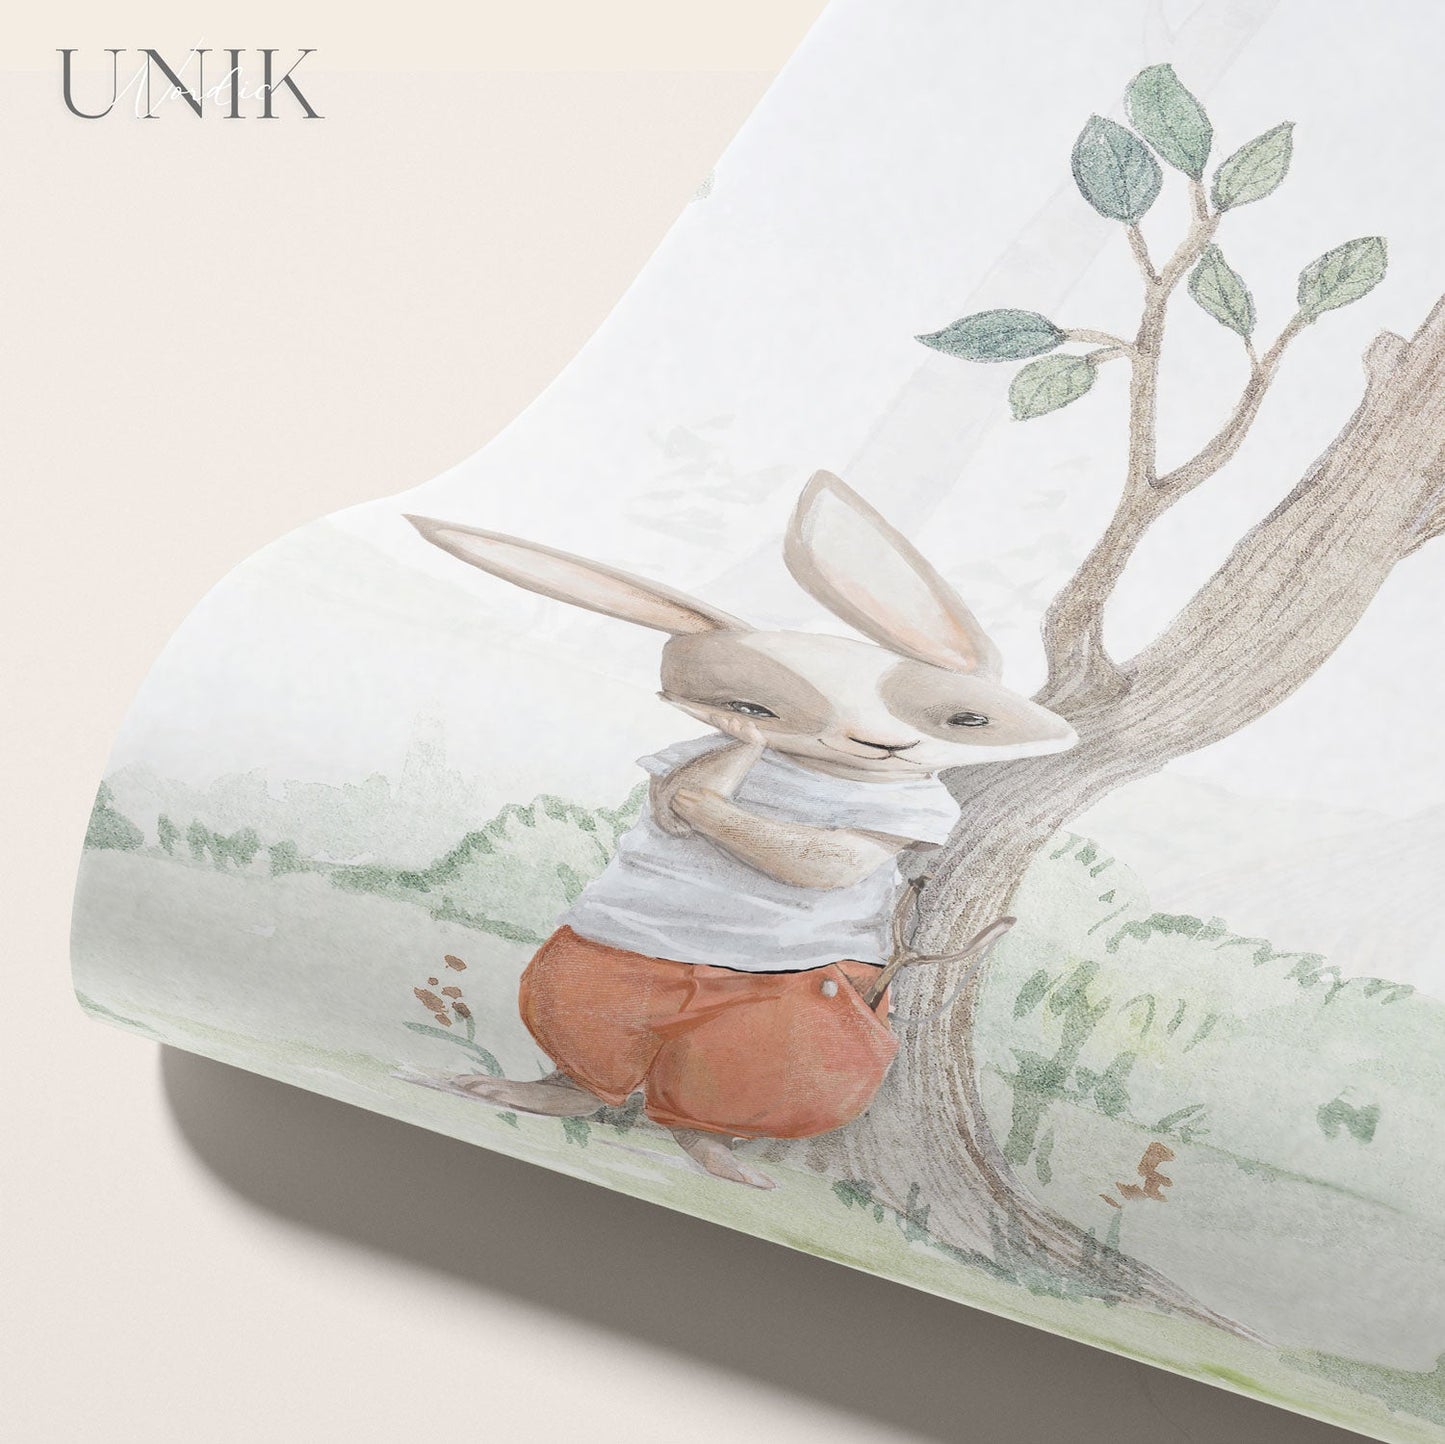 Children's Wallpaper Birch Forest Watercolor With Rabbits